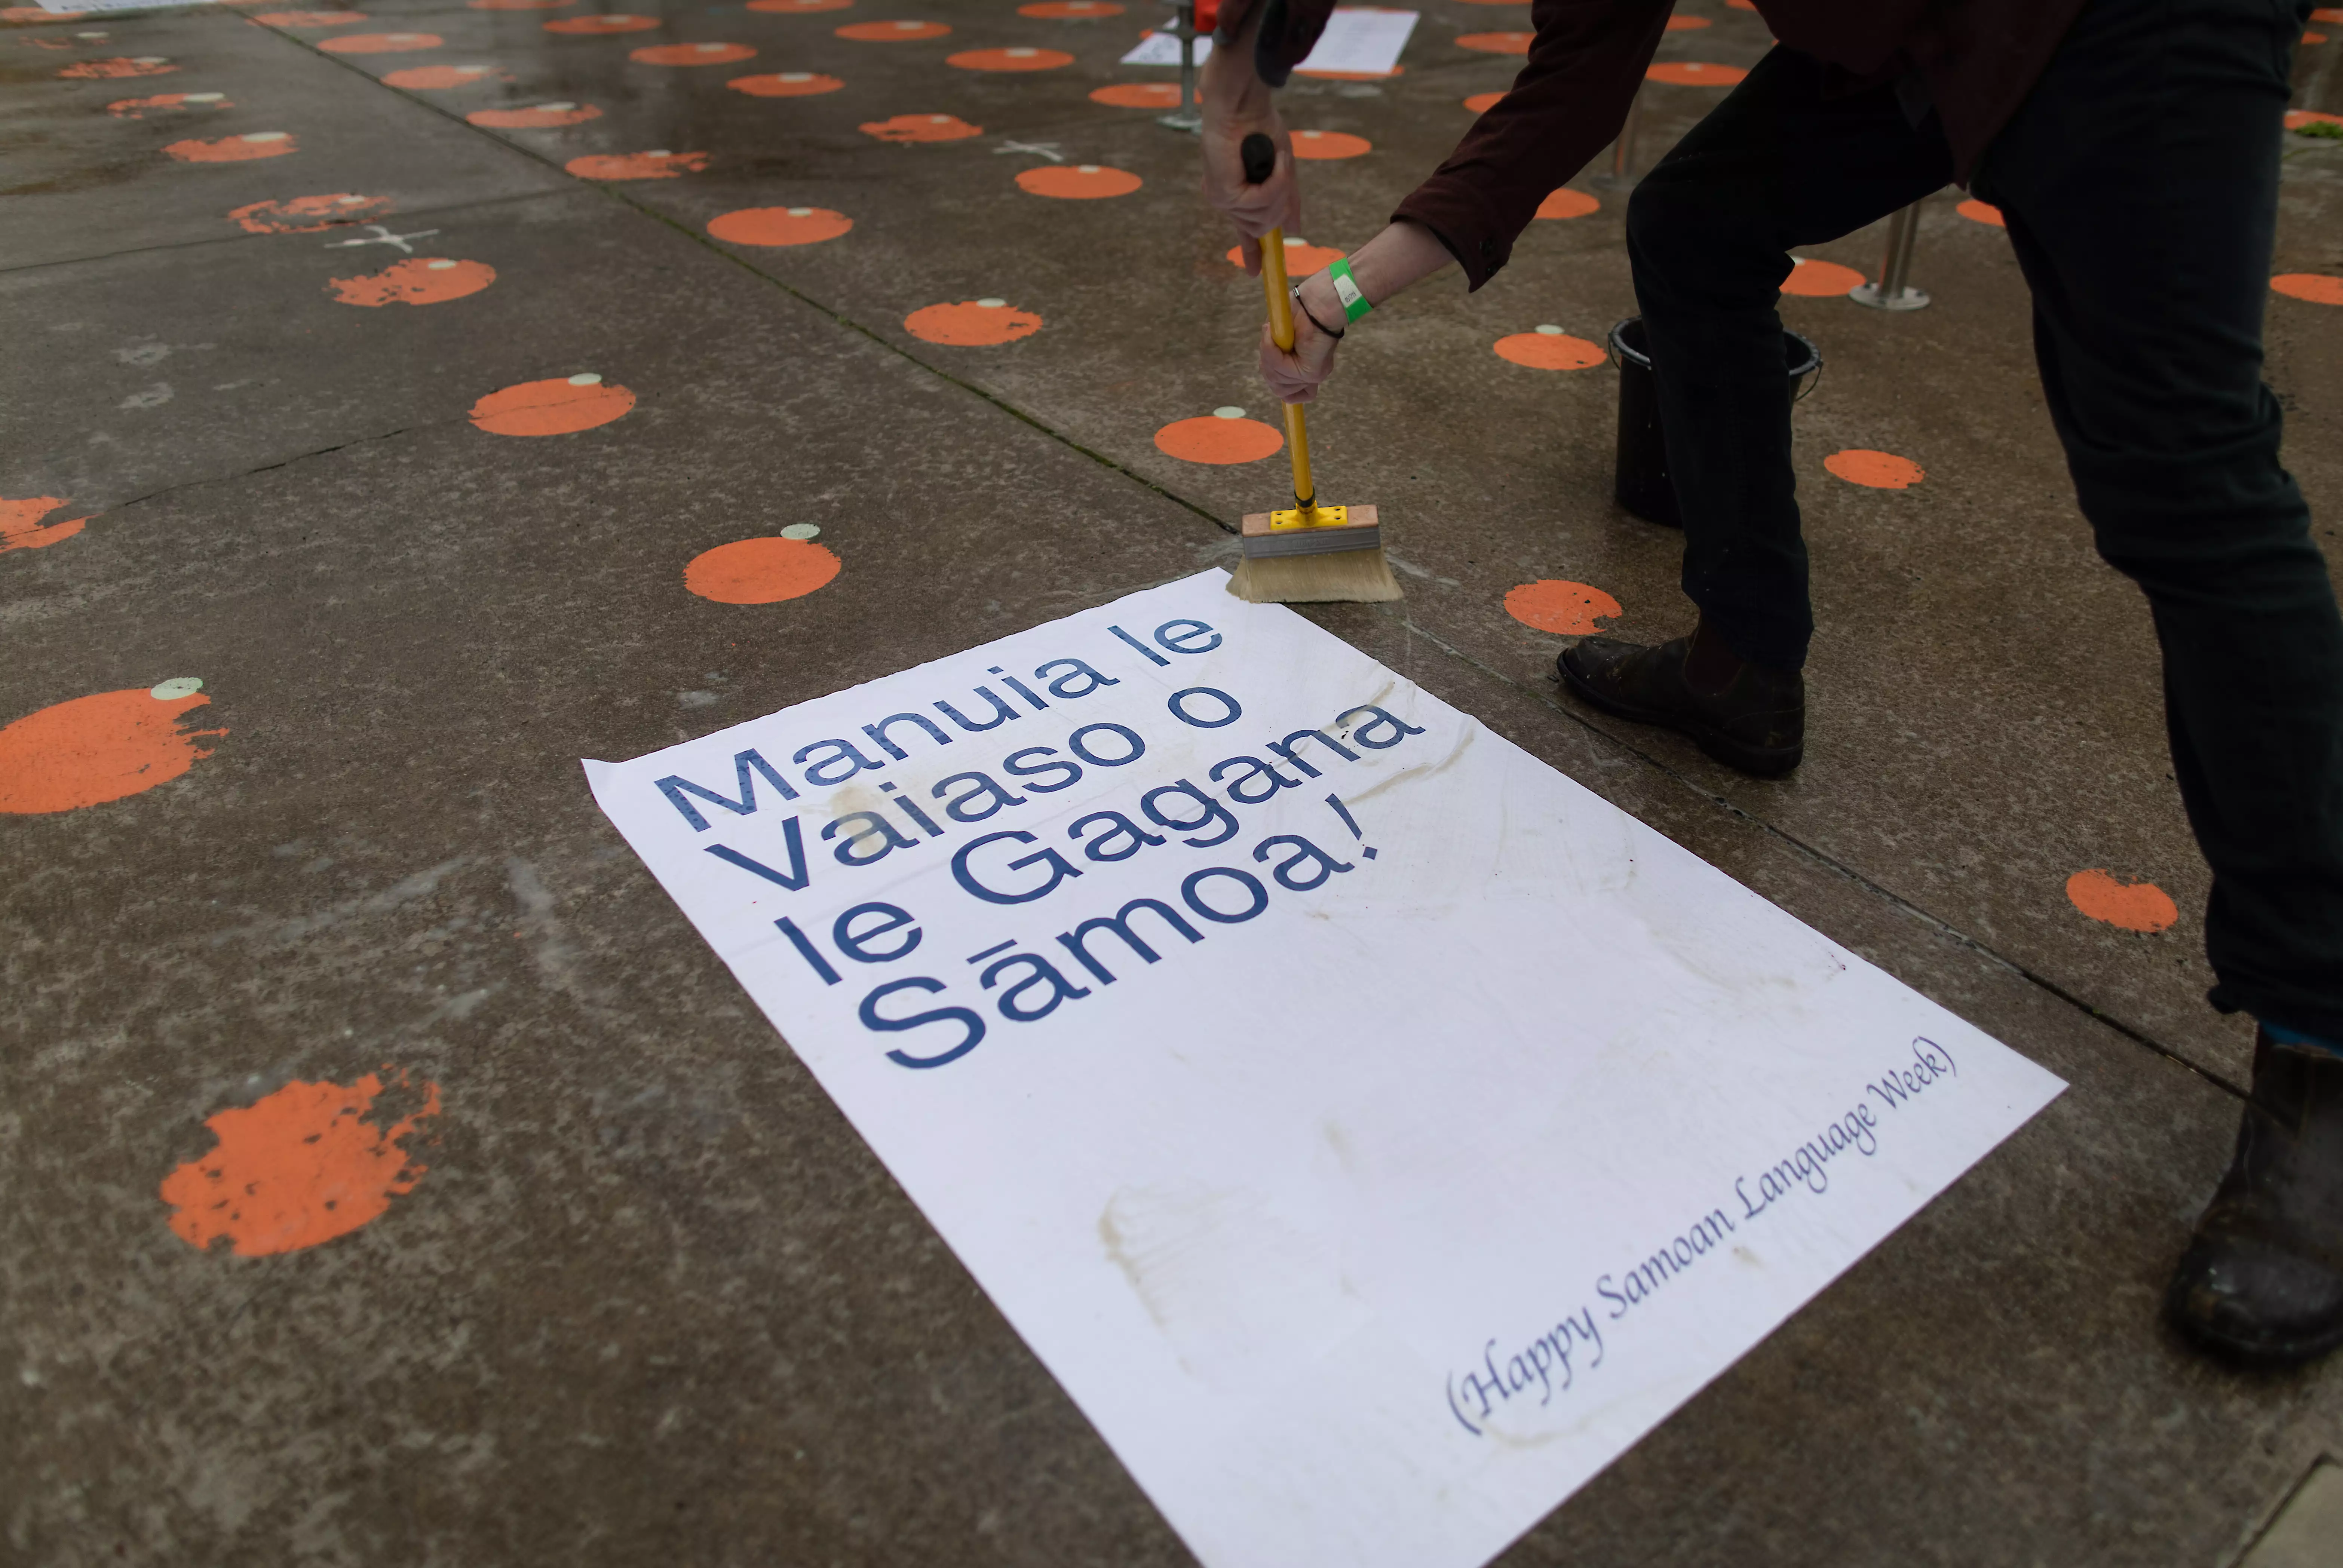 A brush sweeping away glue from a poster installed on the ground promoting Samoan Language Week.